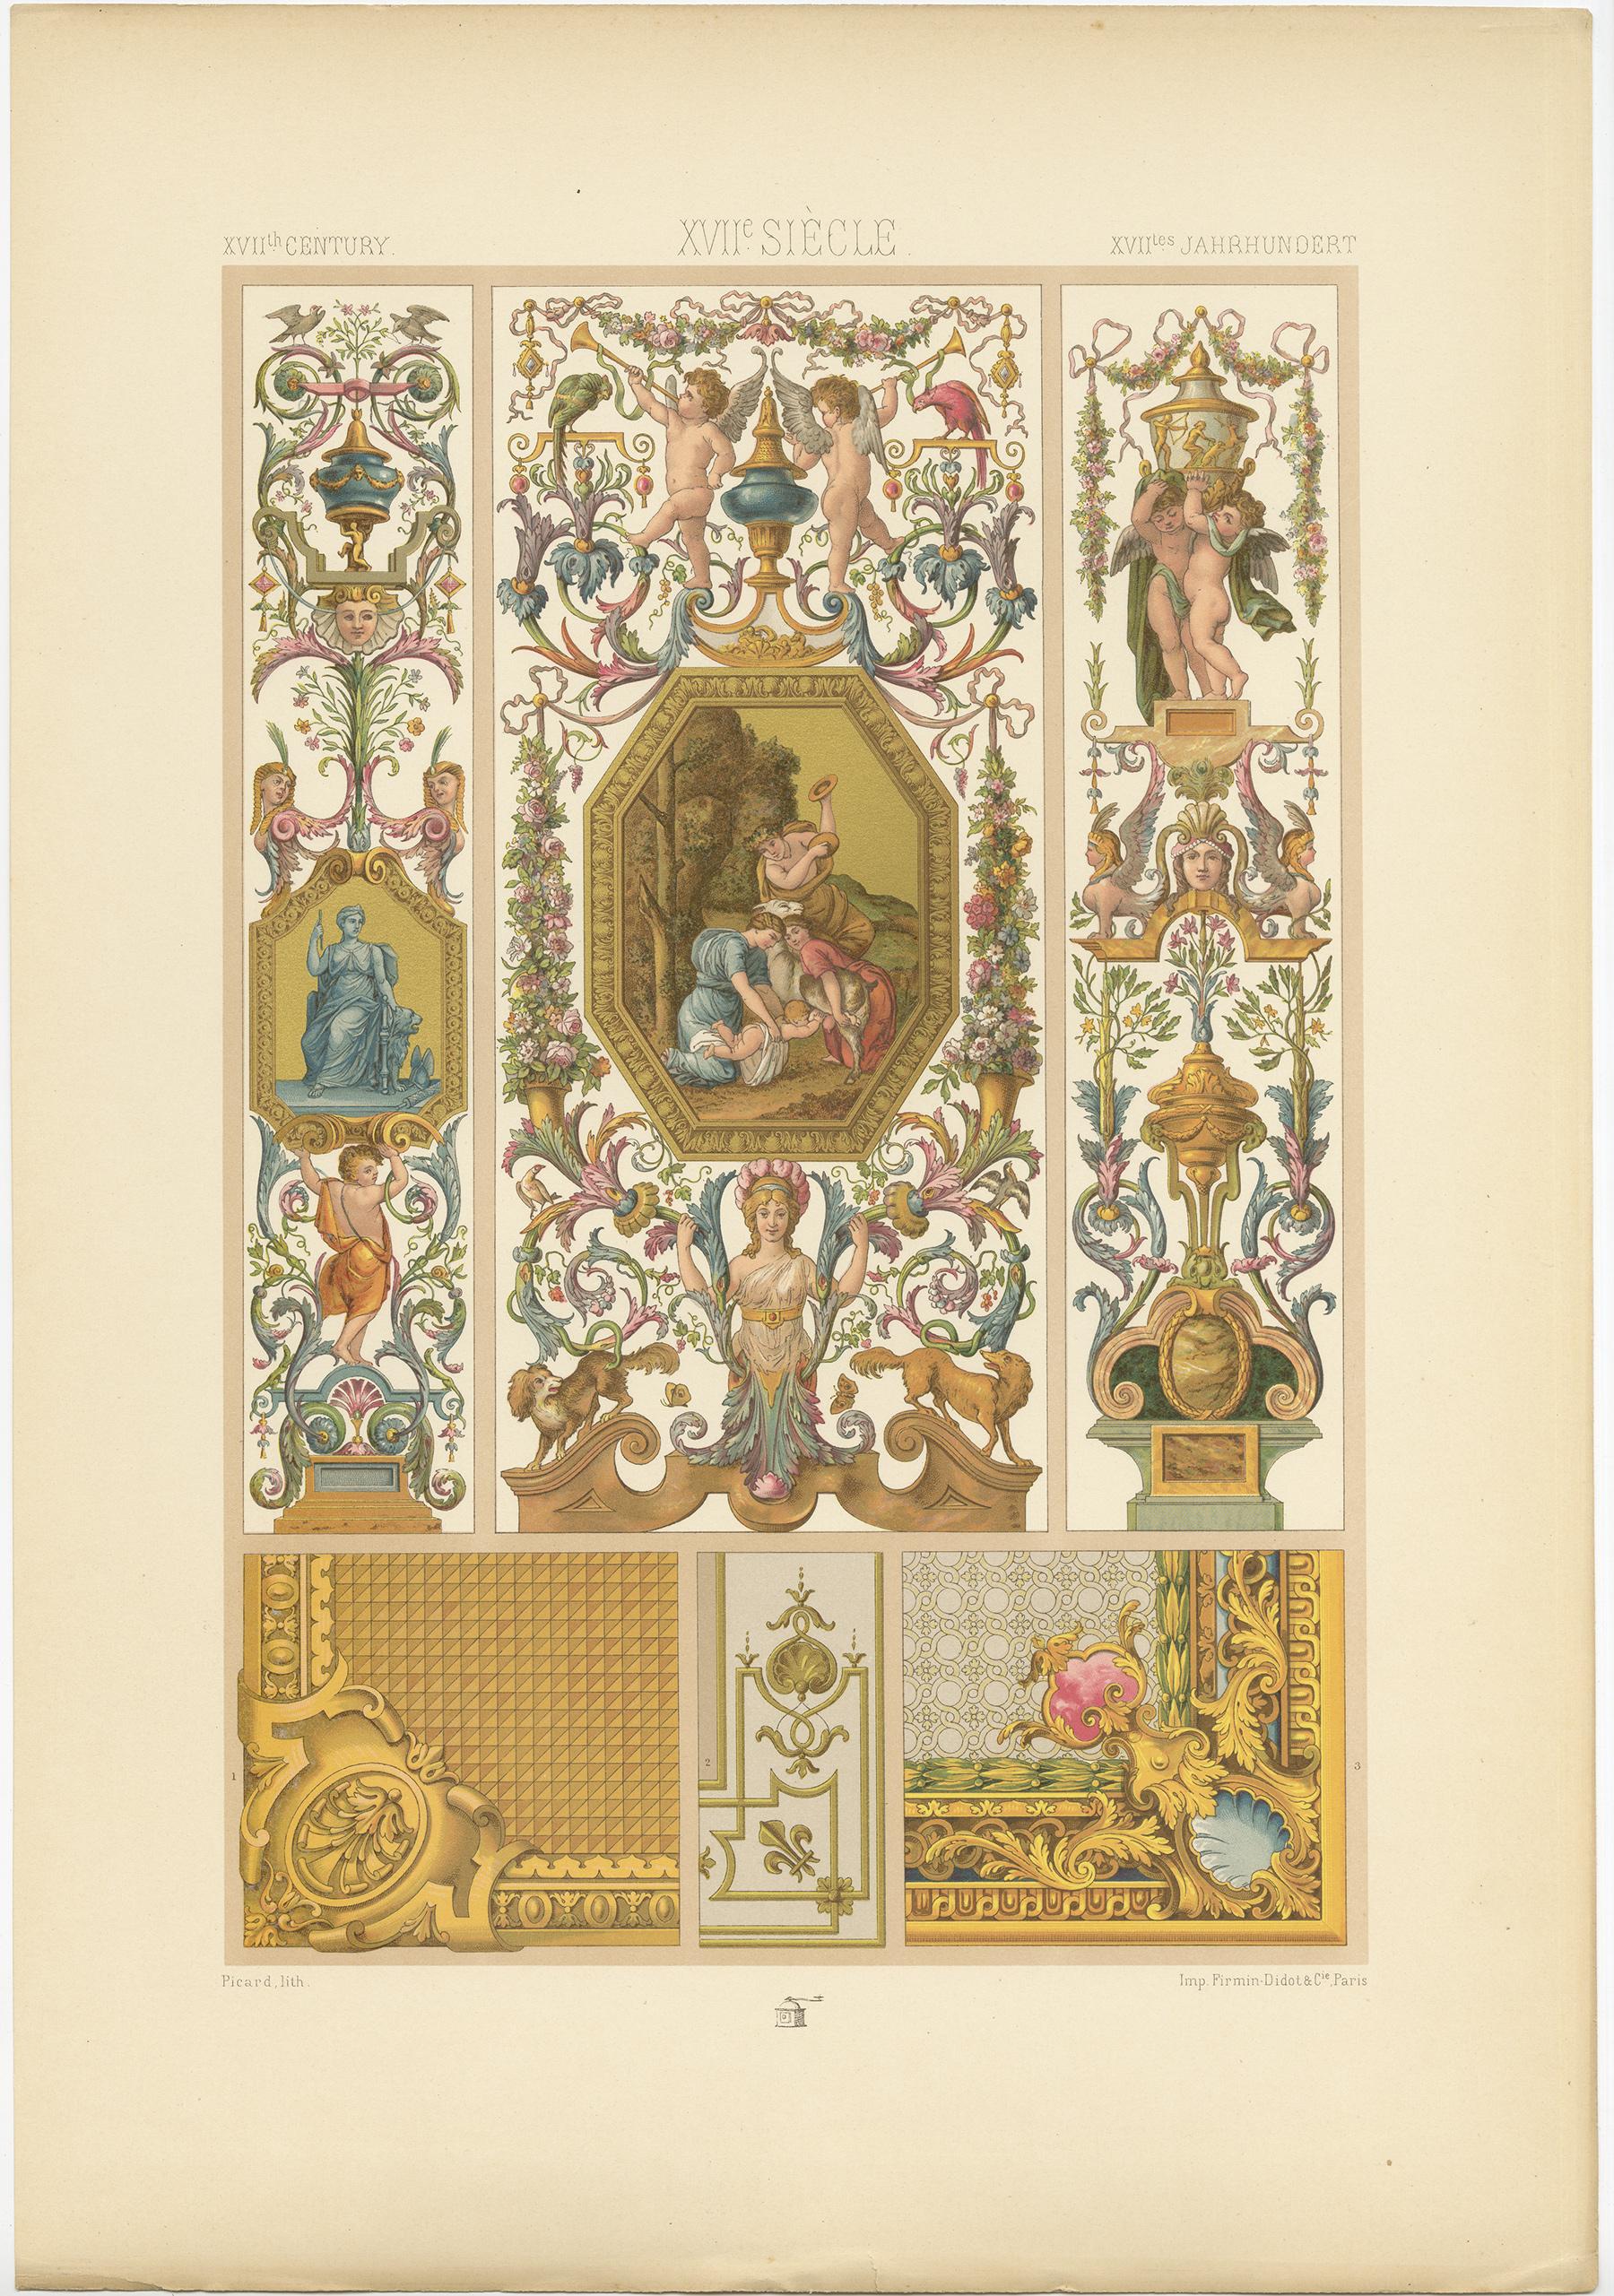 Antique print titled '17th Century - XVIIc Siècle - XVIILes Jahrhundert'. Chromolithograph of interior decor (Painting, tapestry, woodwork), France ornaments. This print originates from 'l'Ornement Polychrome' by Auguste Racinet. Published circa